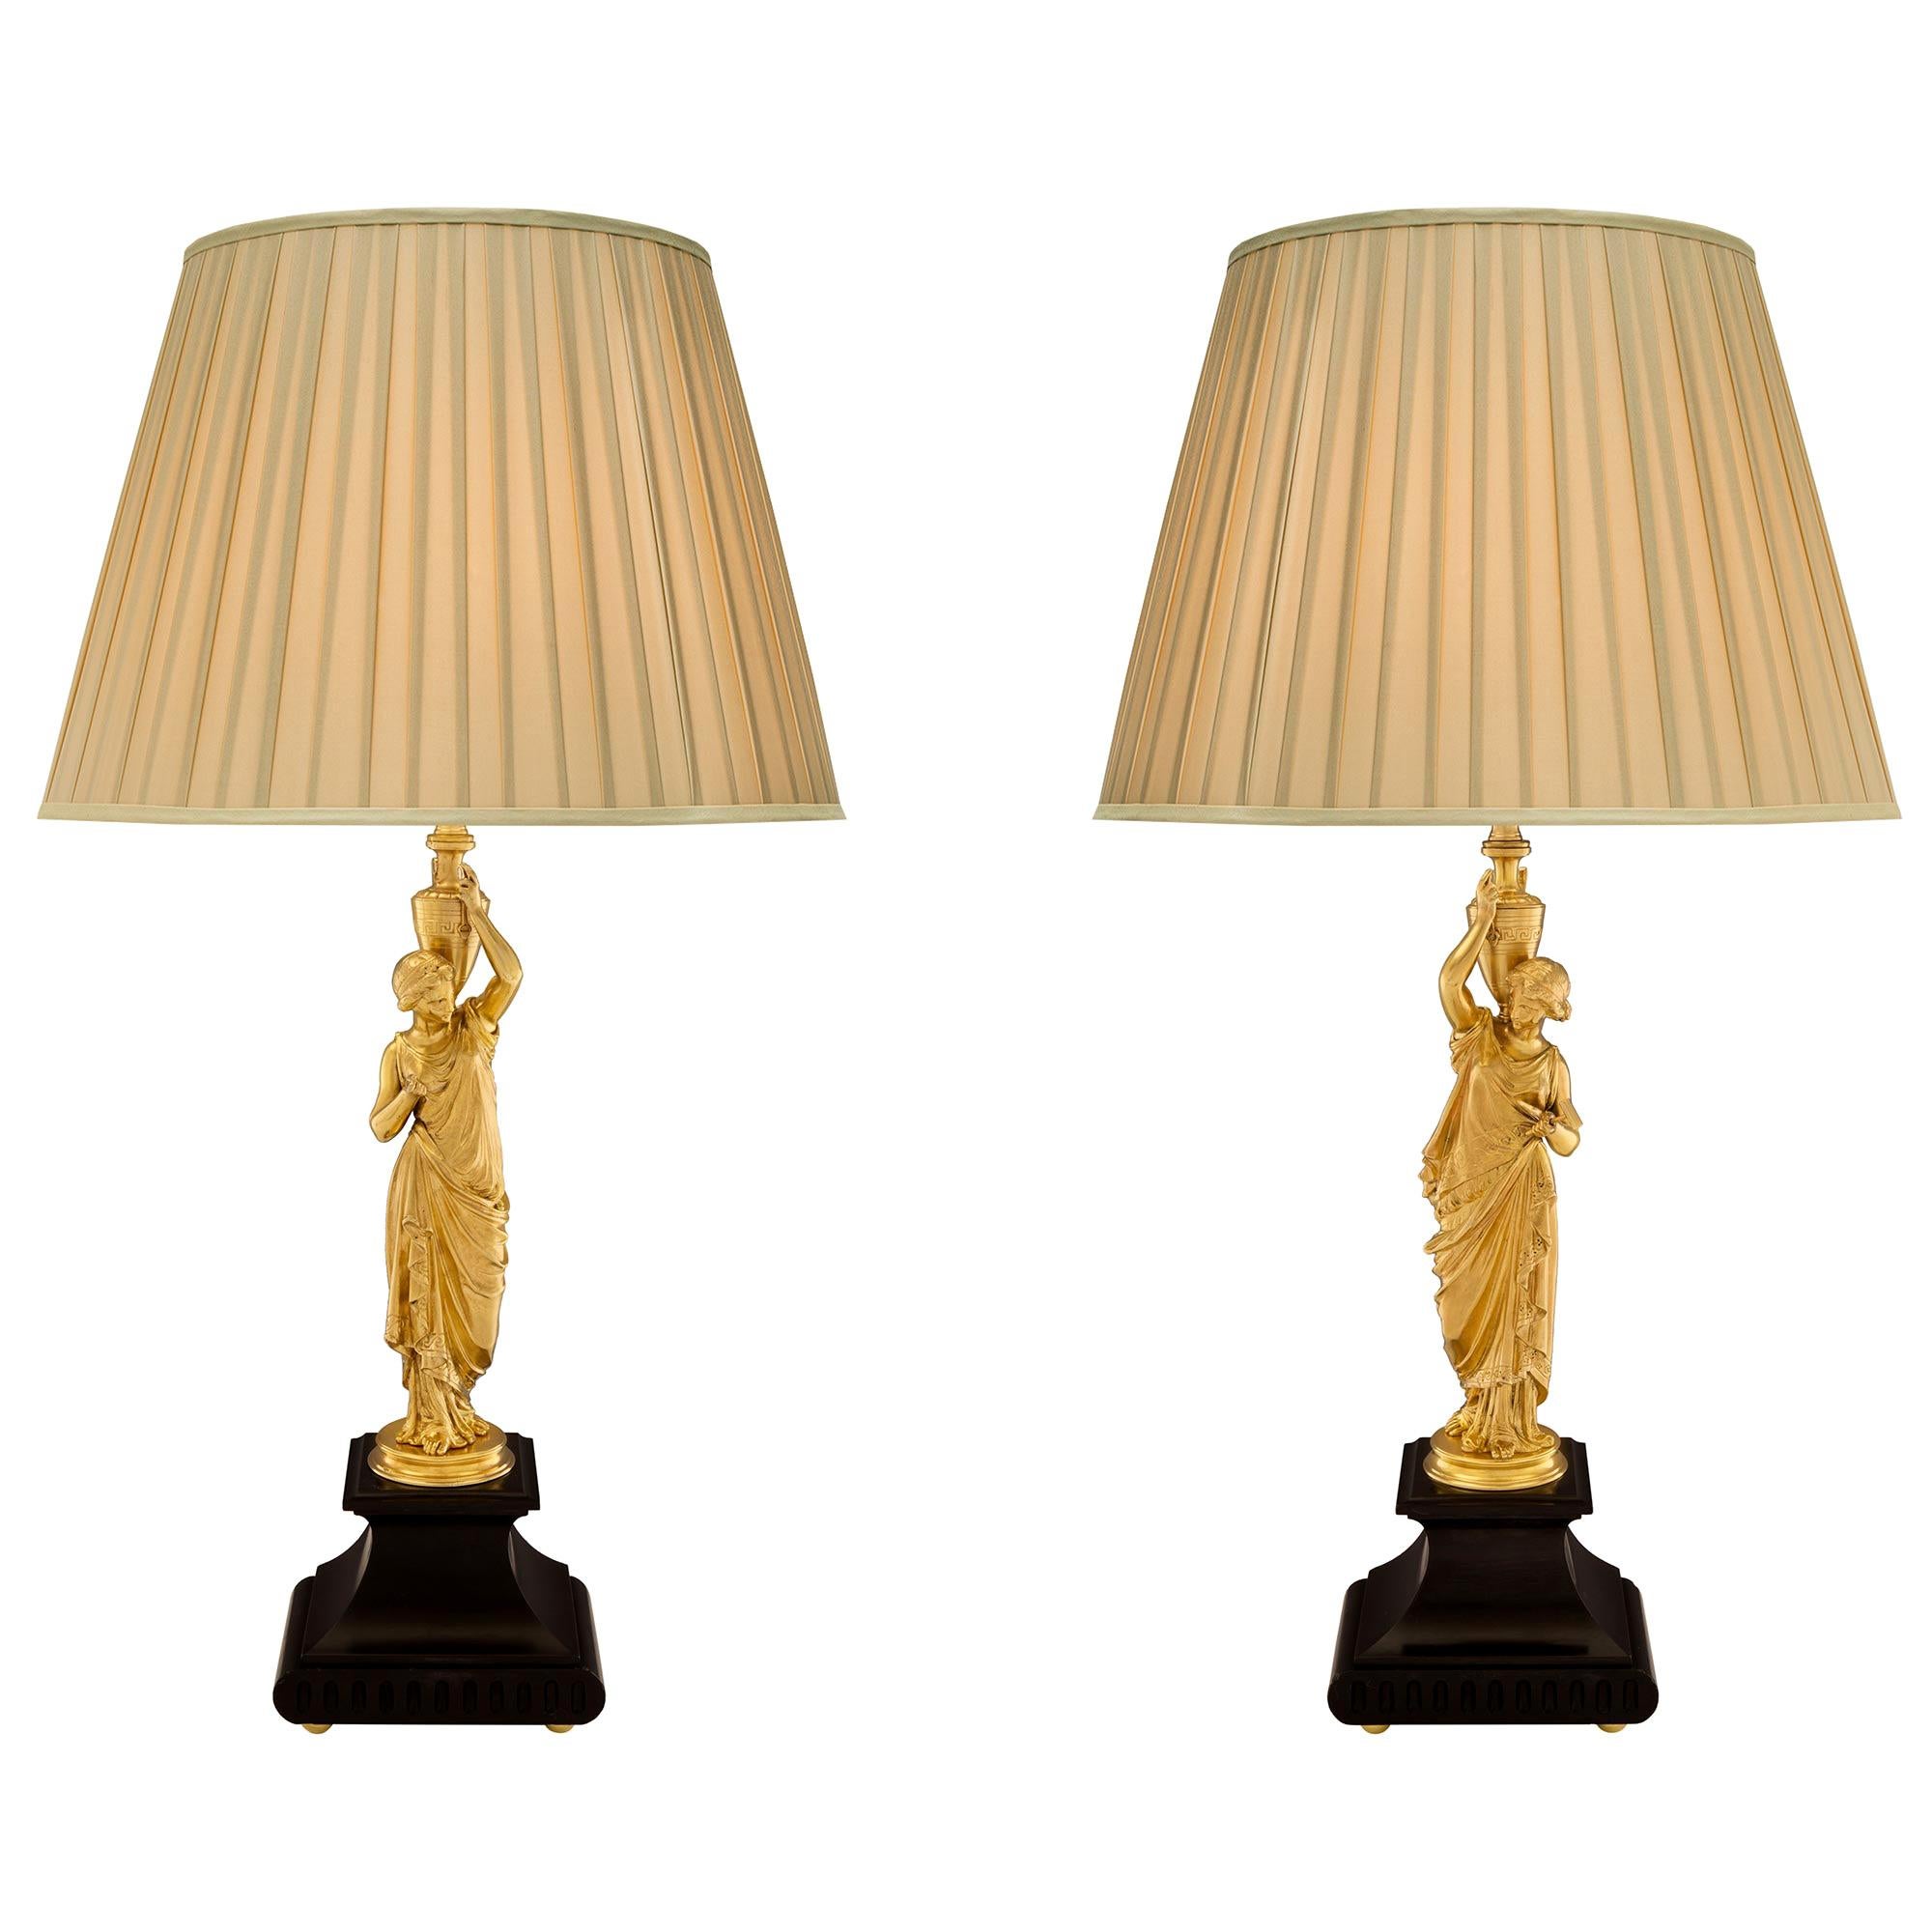 Pair of French 19th Century Neoclassical Style Ormolu and Marble Lamps